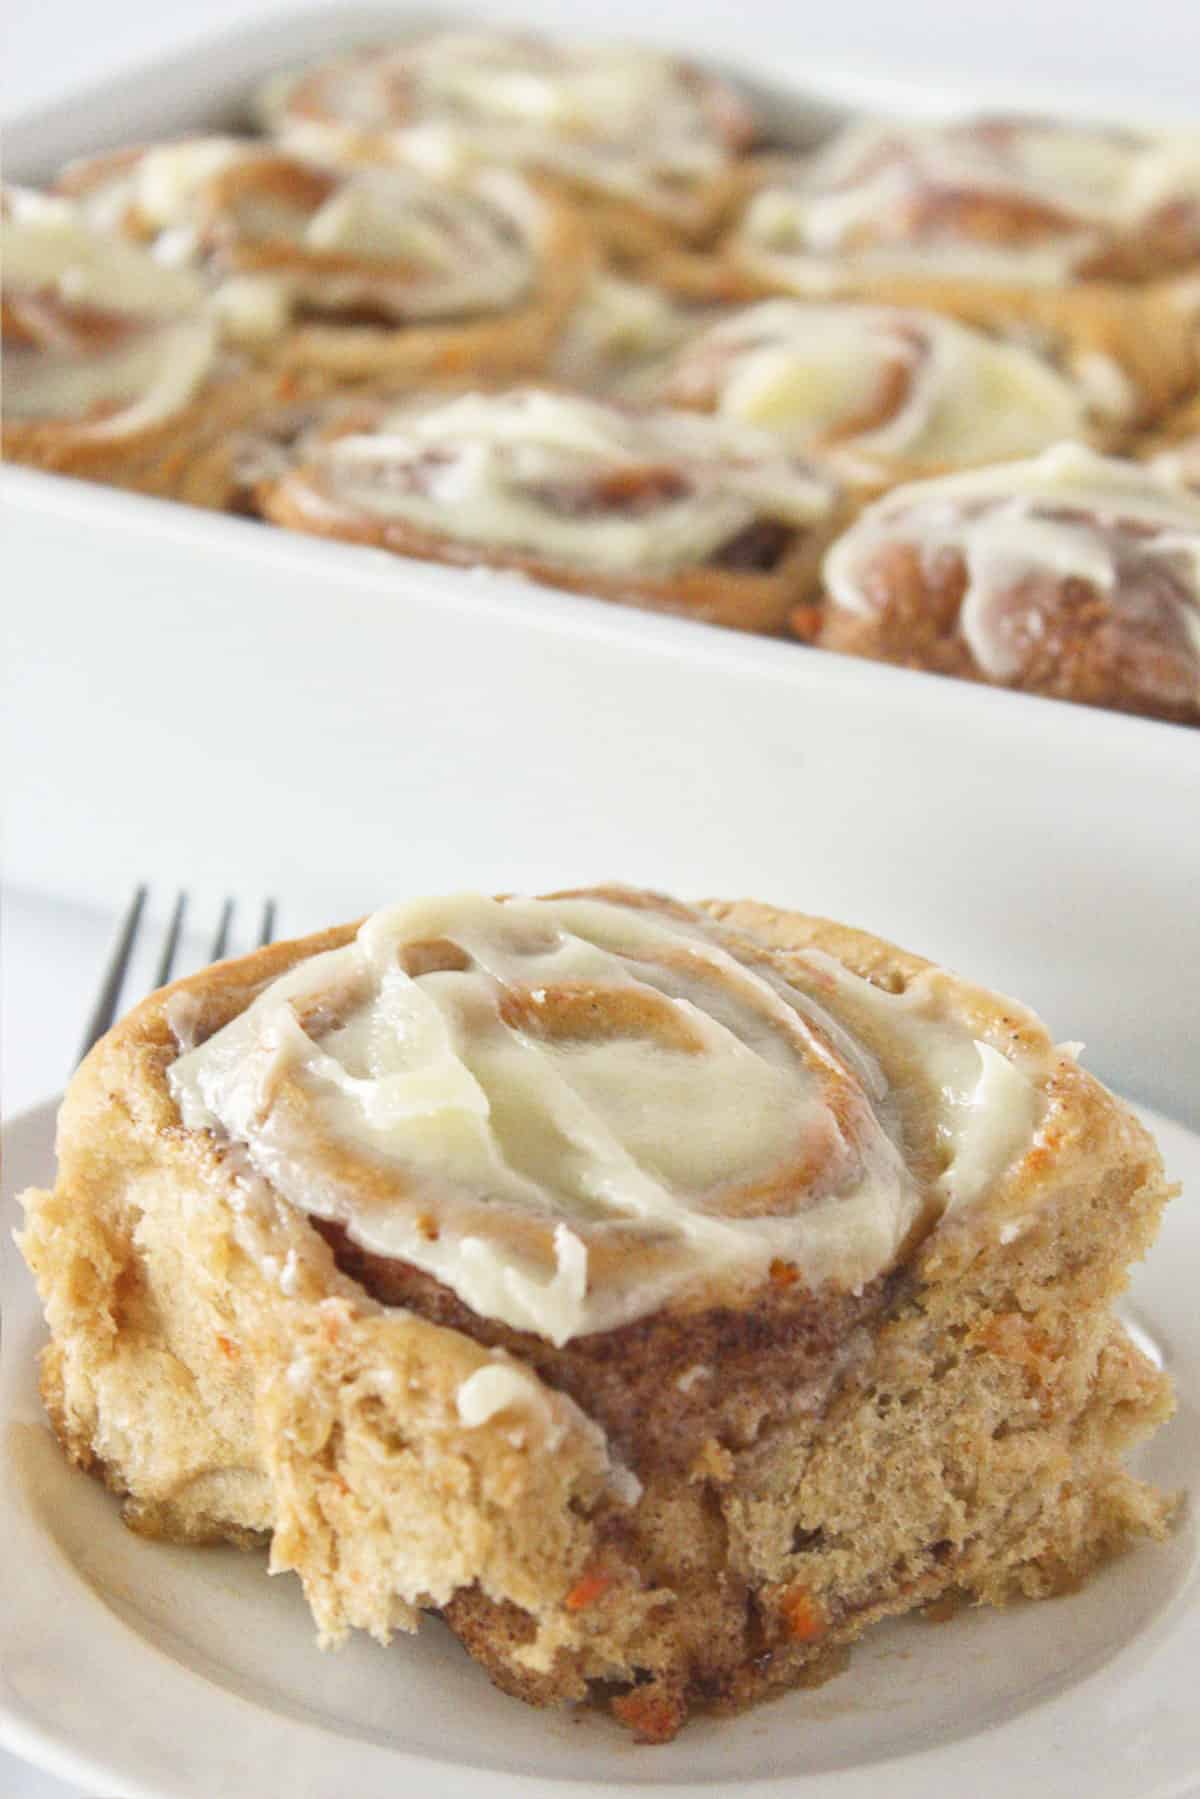 Serving one carrot cake cinnamon roll with cream cheese icing.